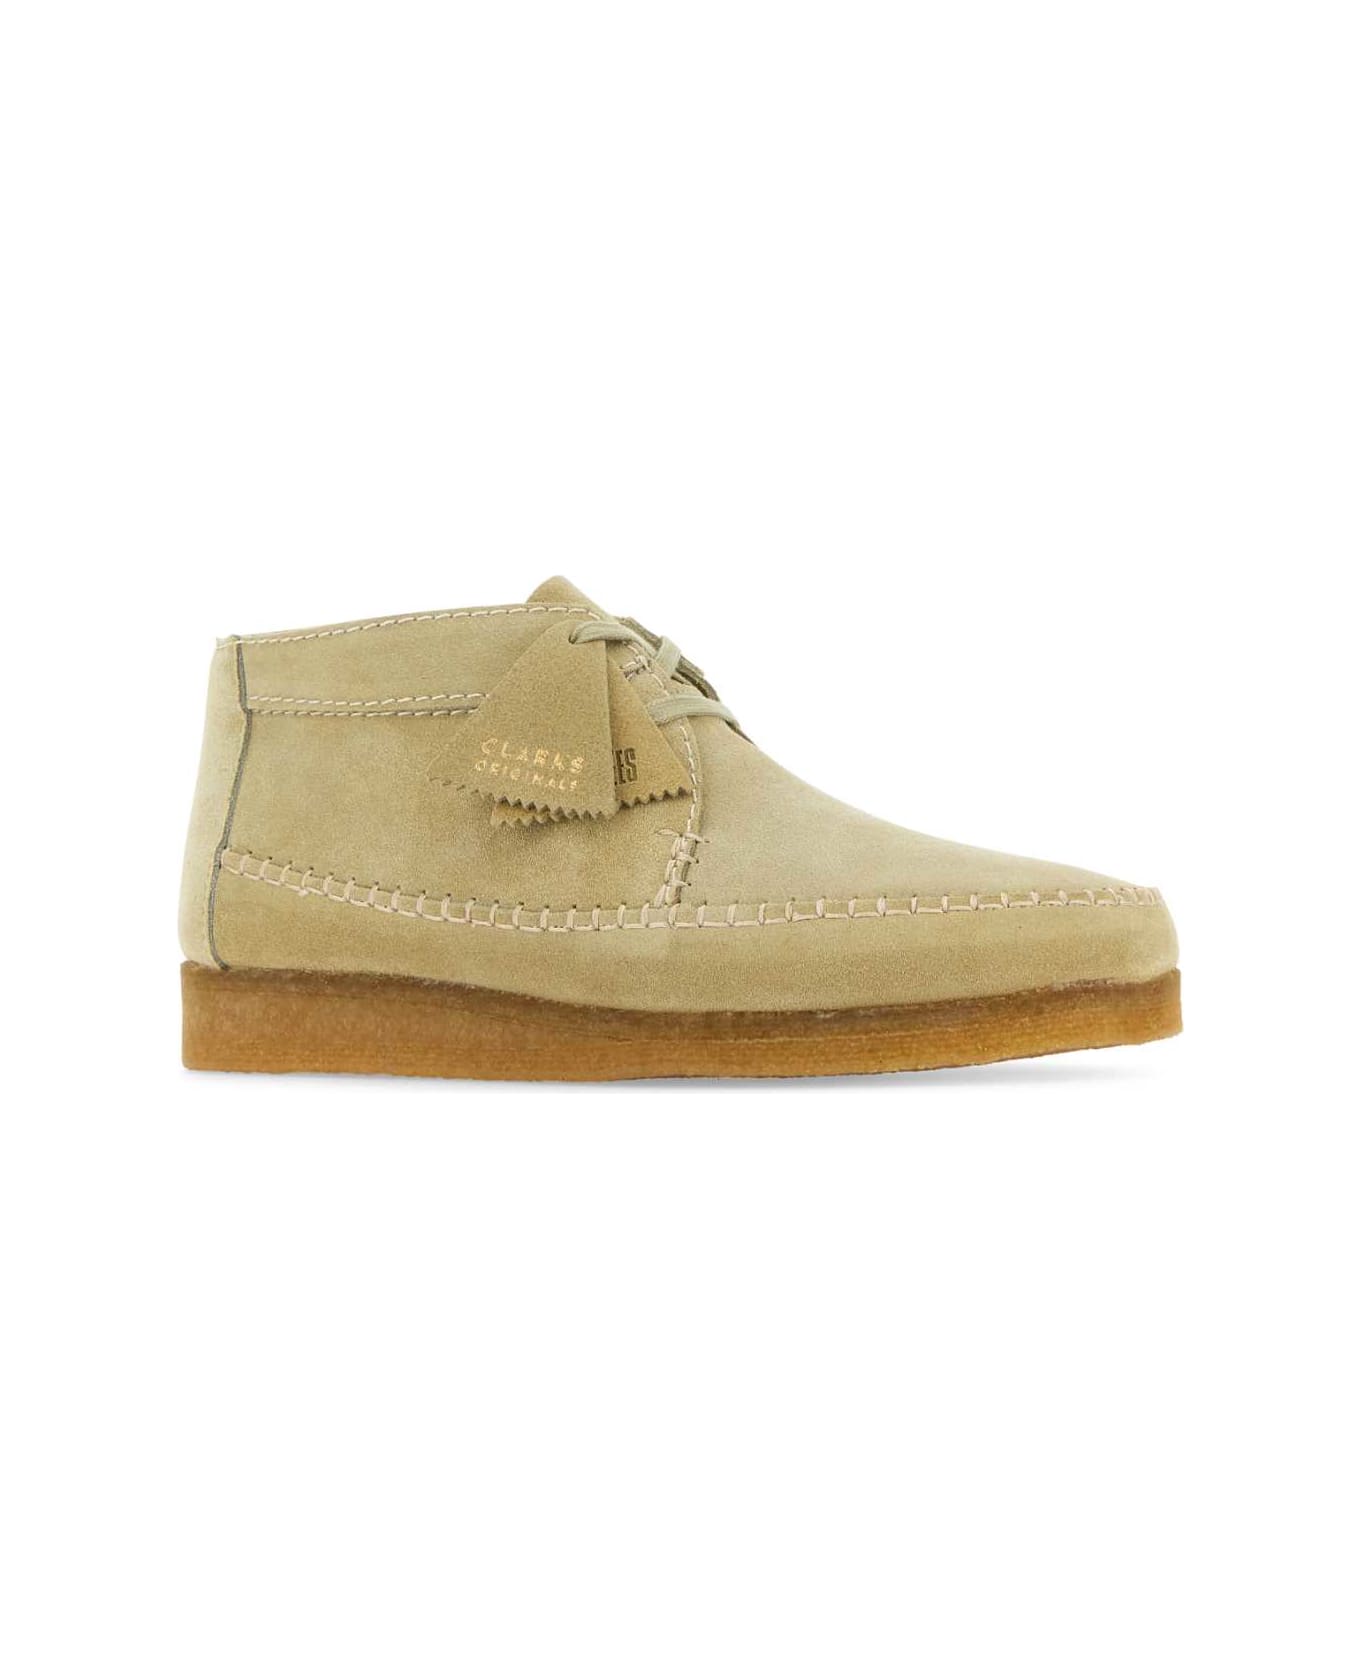 Clarks Beige Suede Weaver Ankle Boots - MAPLESUEDE